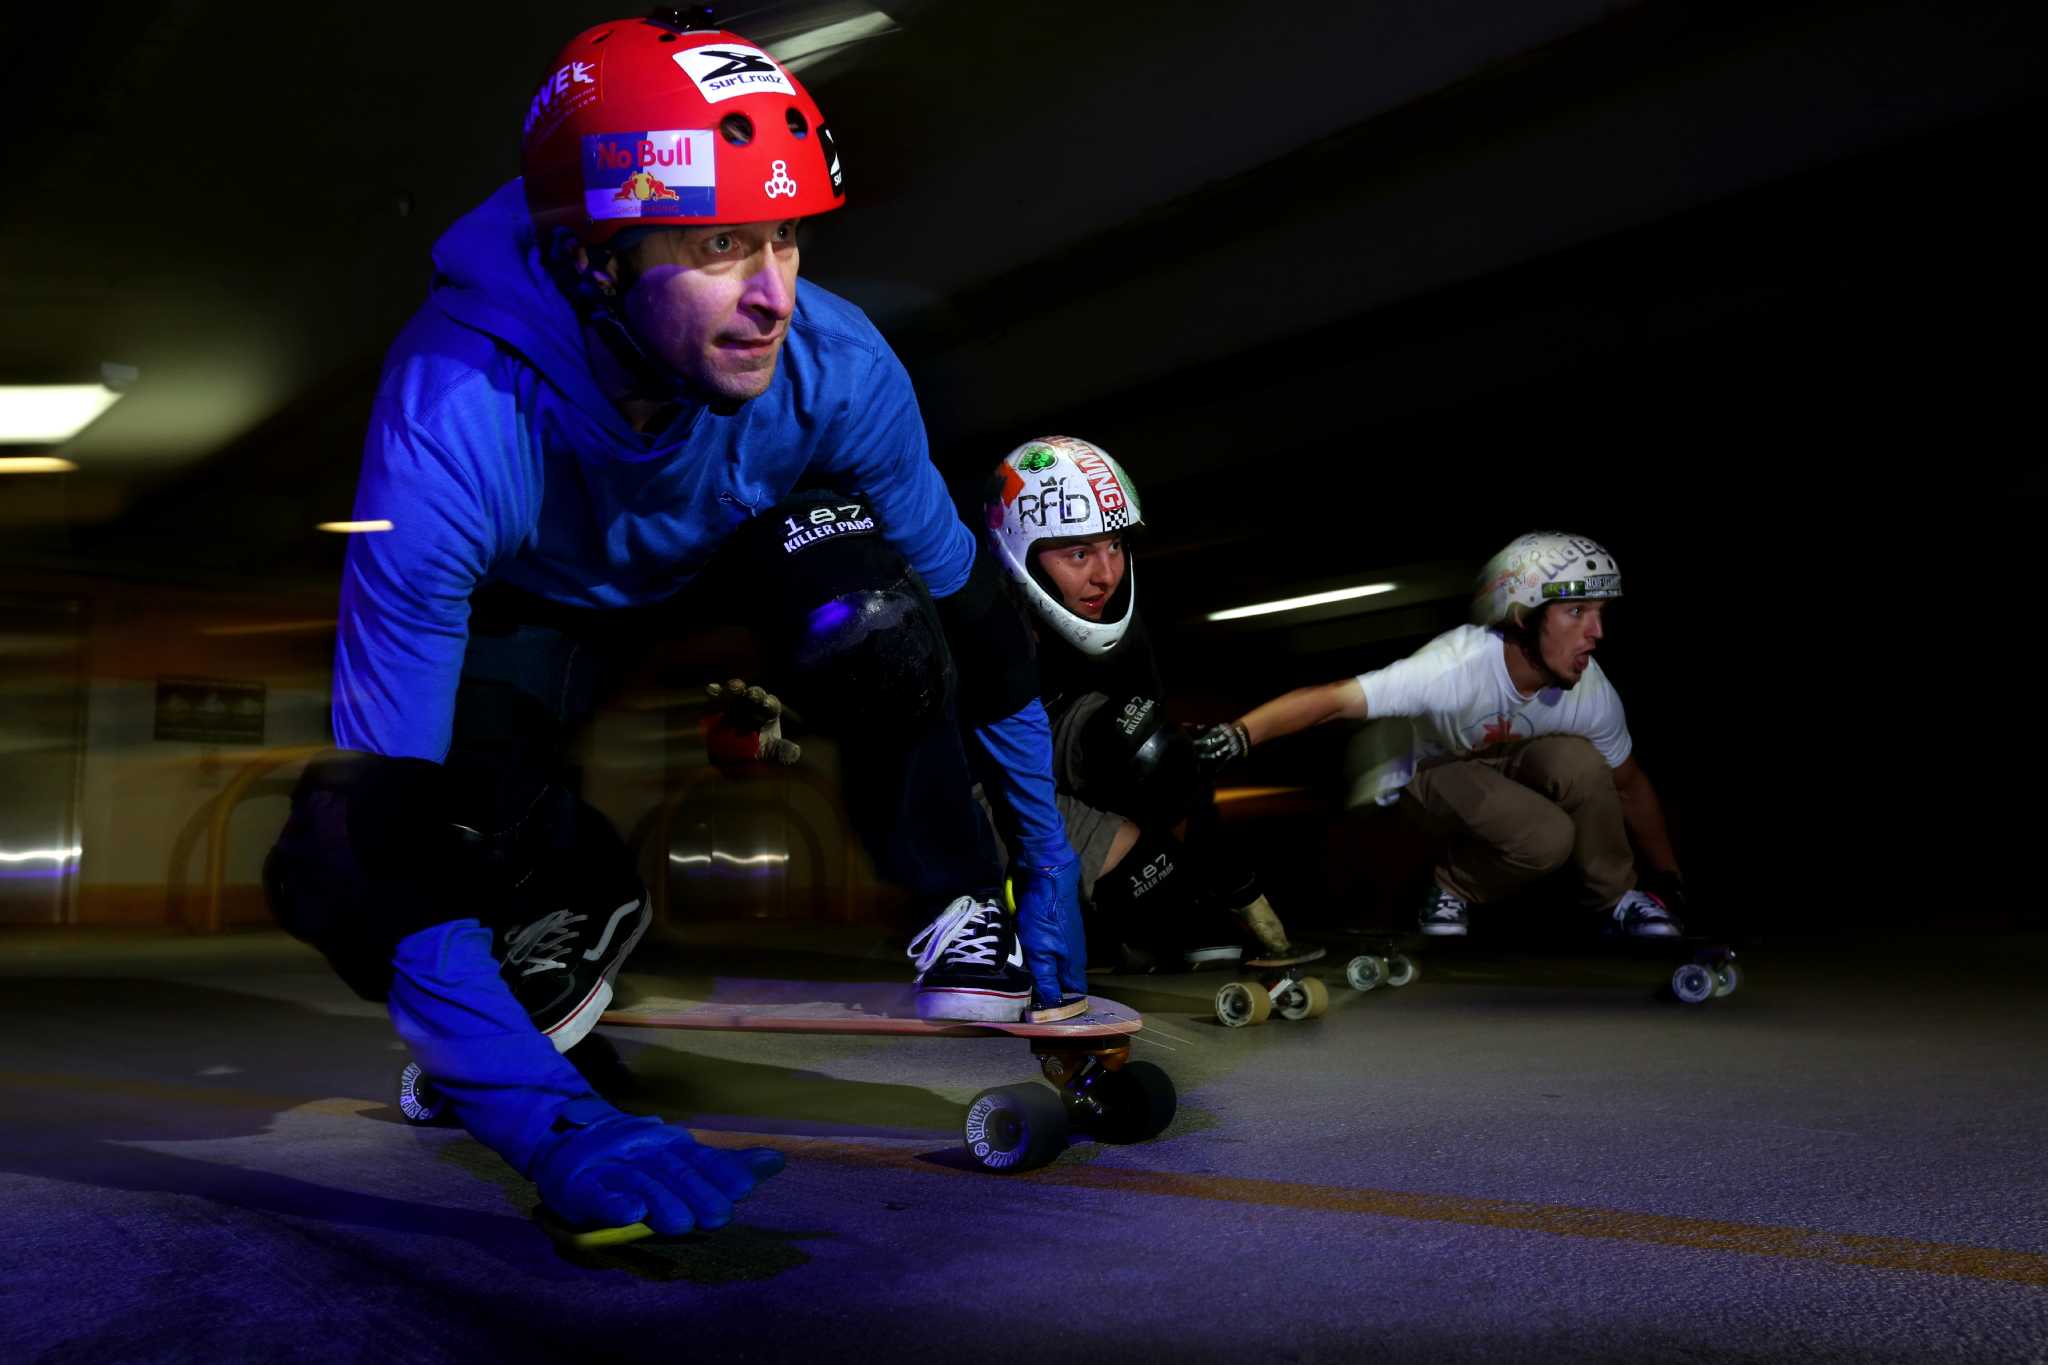 Longboarders rally for second round of garage races - Houston Chronicle2048 x 1365